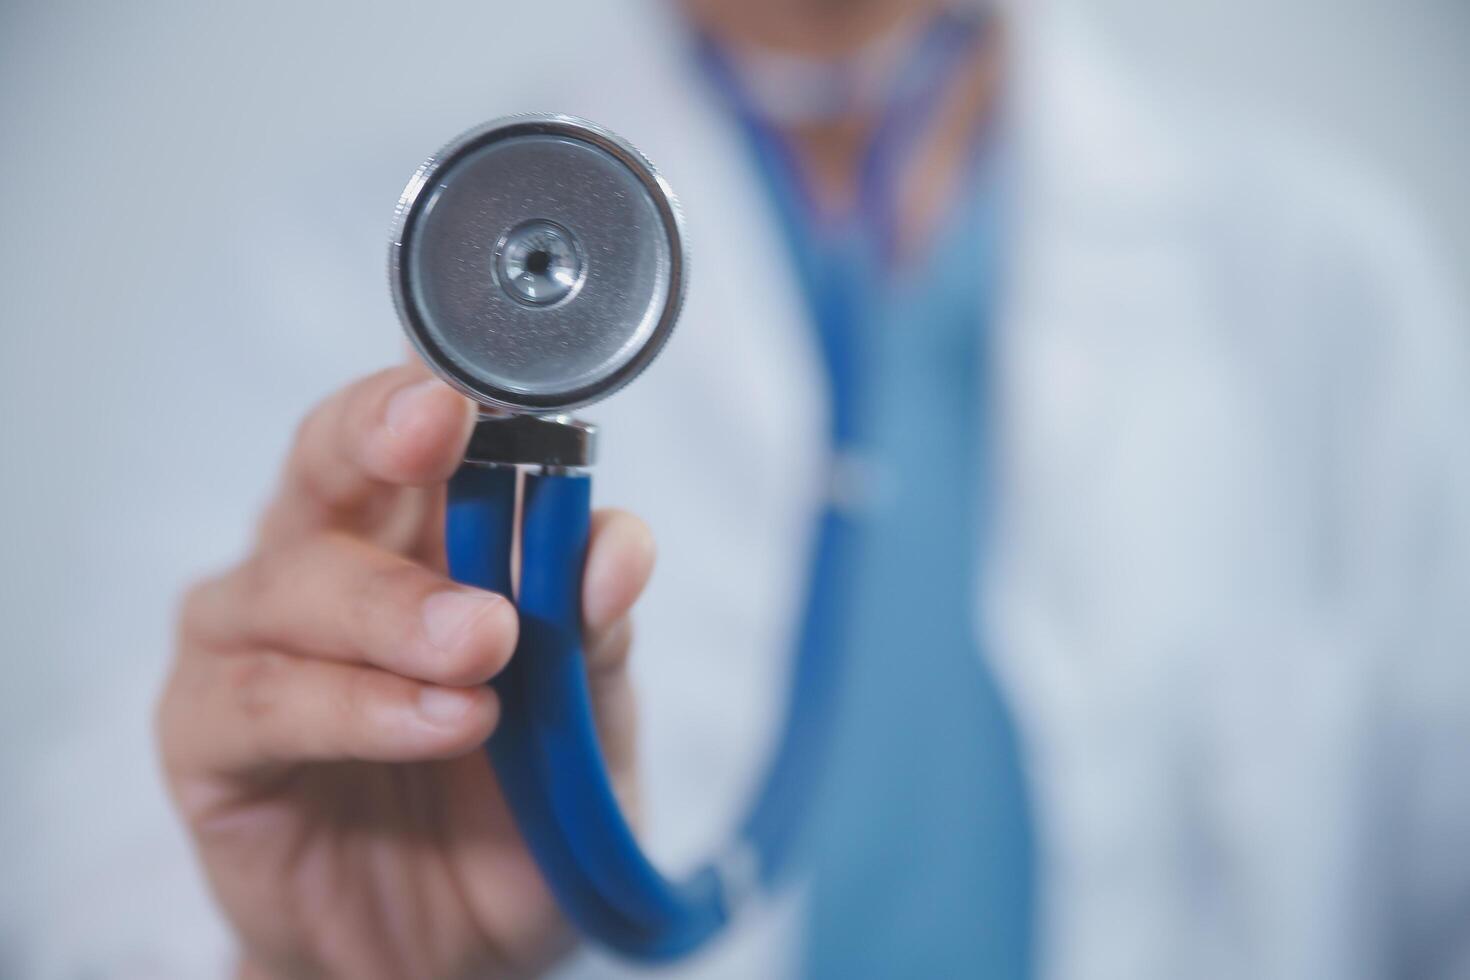 Senior doctor wearing white coat standing holding stethoscope in hands. Older male physician healthcare professional showing medical equipment ready to listen lungs or heart concept. Close up view photo